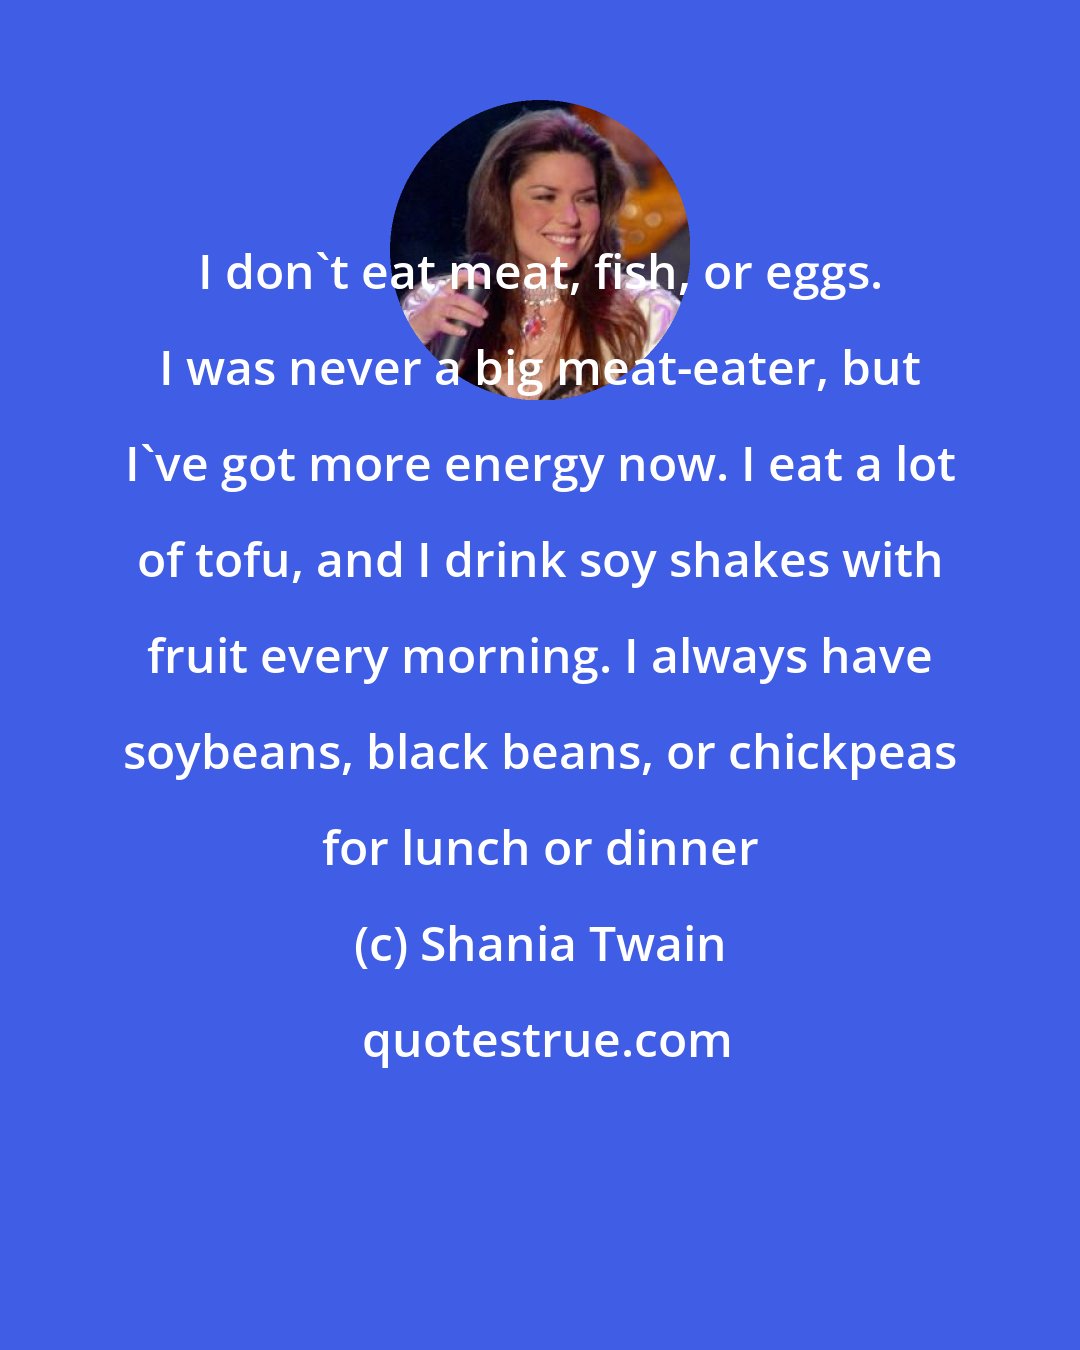 Shania Twain: I don't eat meat, fish, or eggs. I was never a big meat-eater, but I've got more energy now. I eat a lot of tofu, and I drink soy shakes with fruit every morning. I always have soybeans, black beans, or chickpeas for lunch or dinner